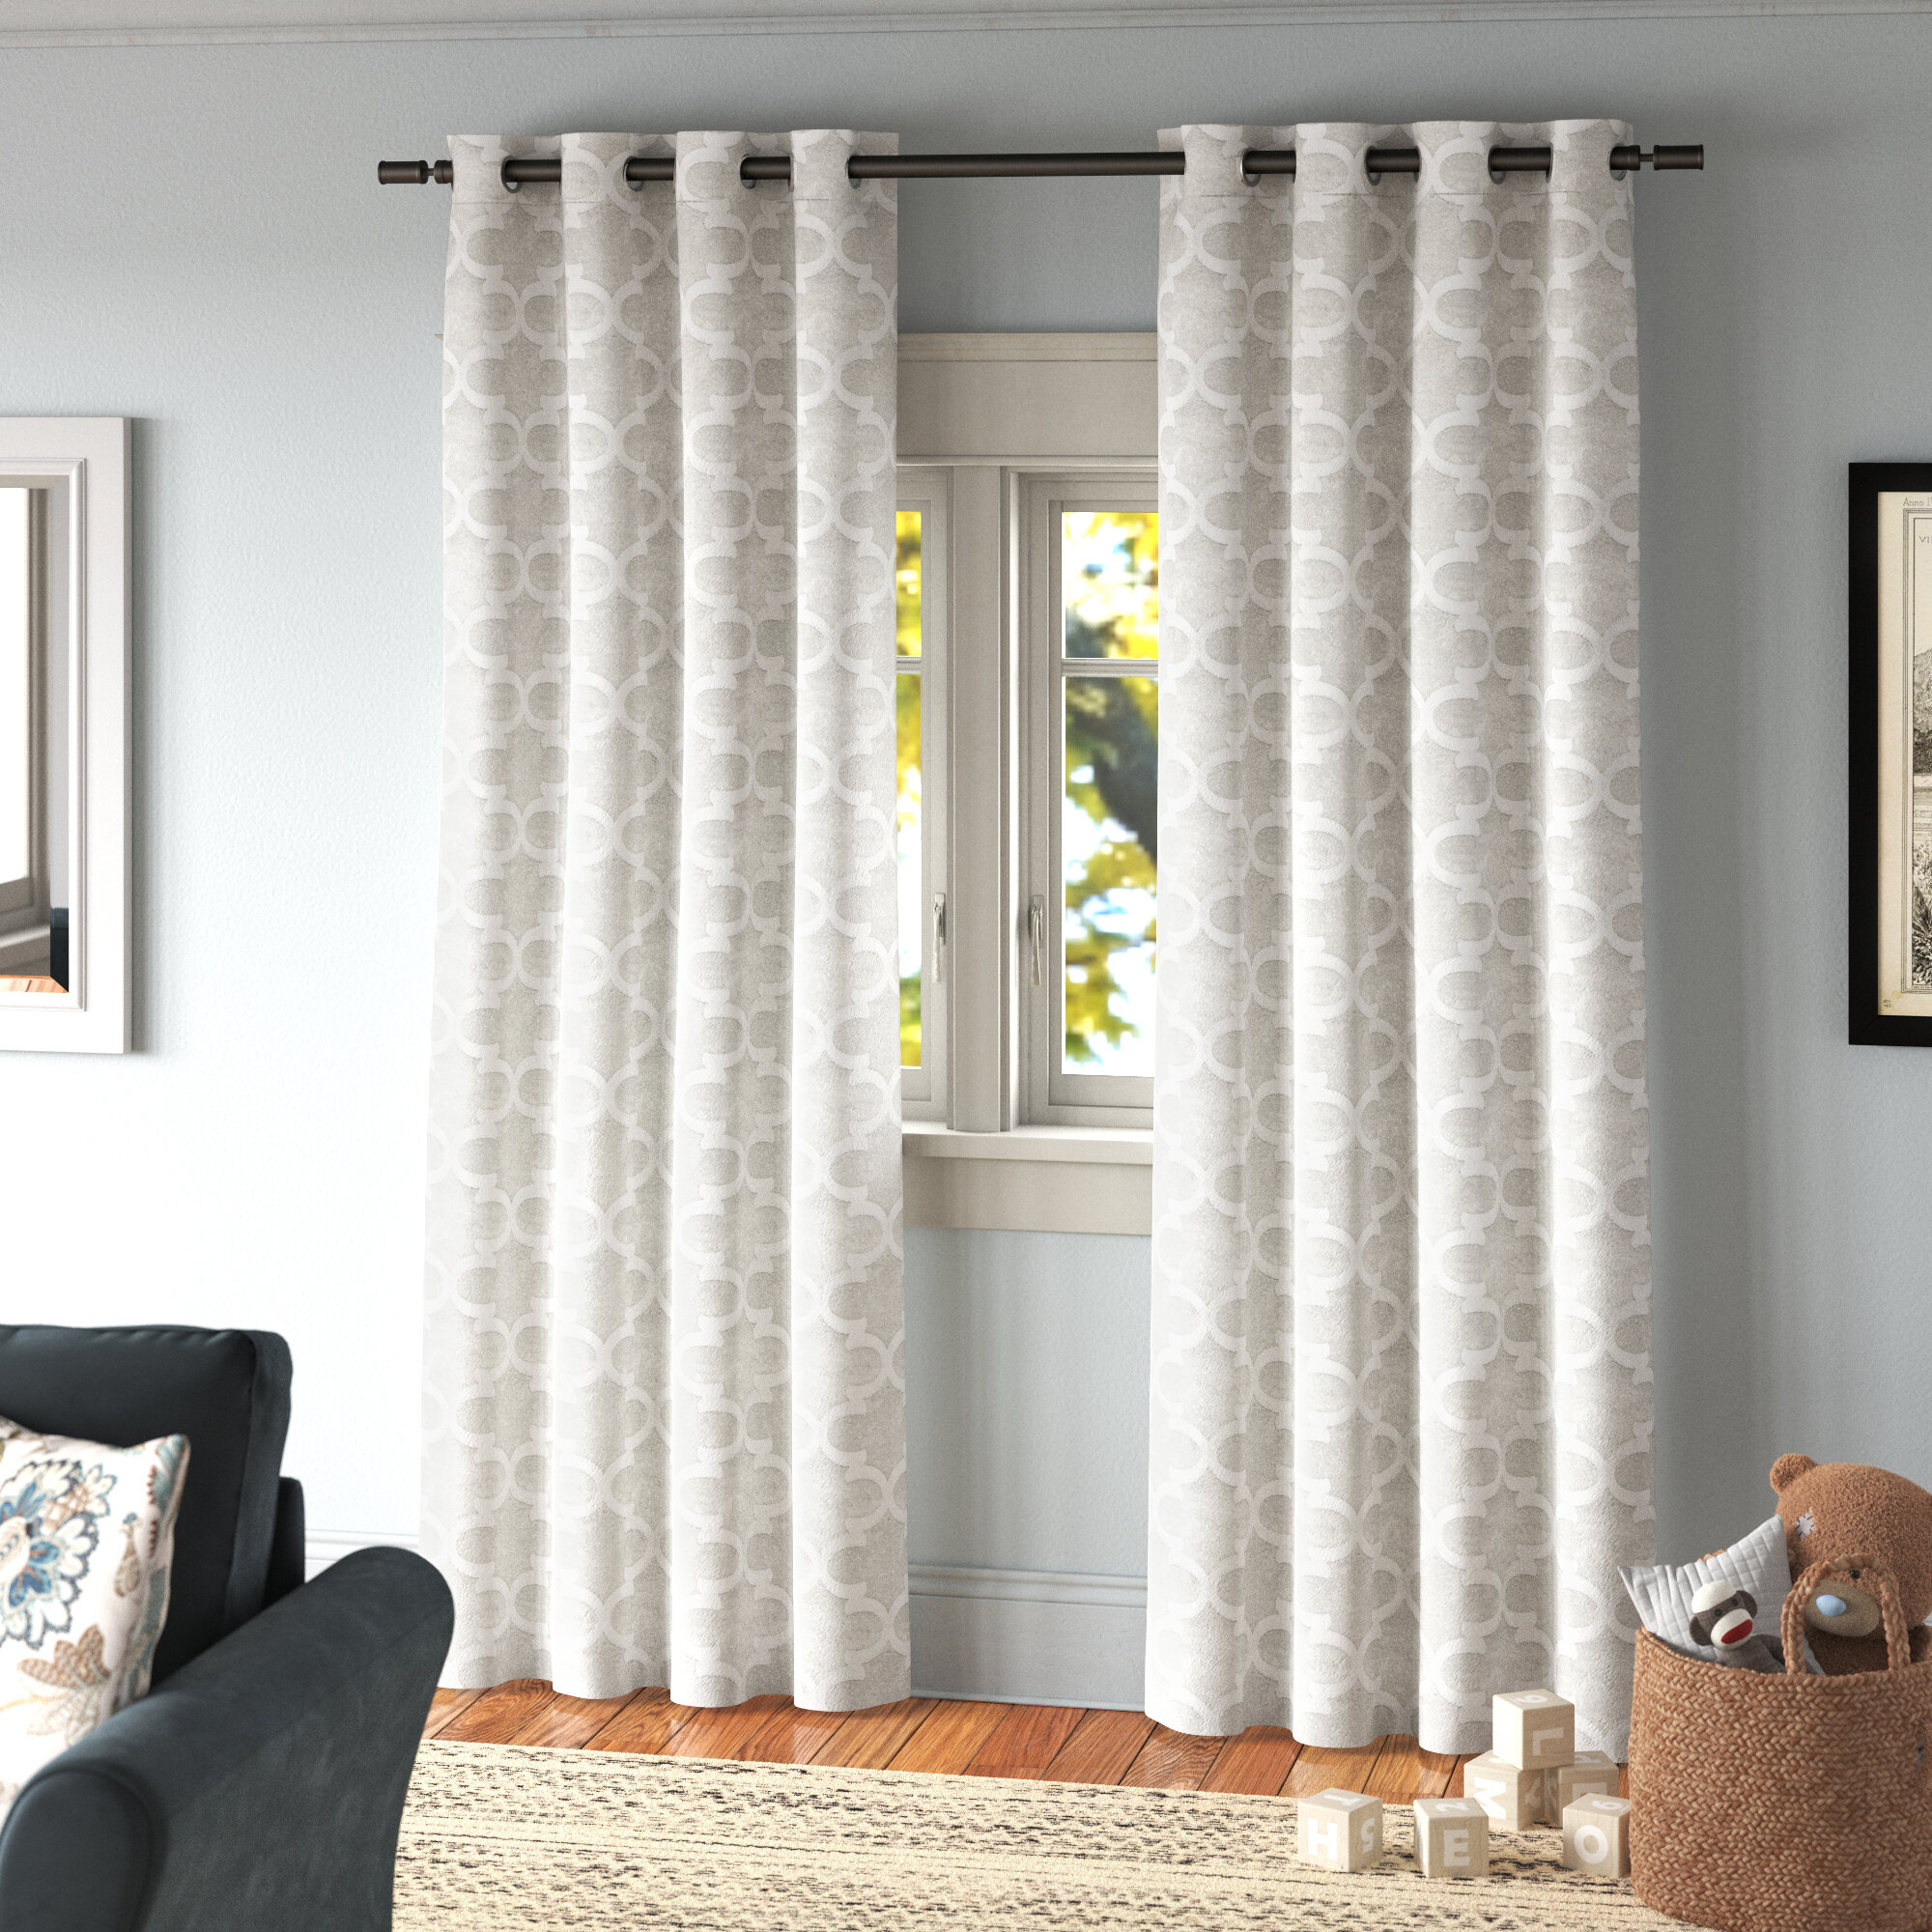 1-2X Panel Blackout Window Curtains Living Room Bedroom Thermal Insulated Drapes 